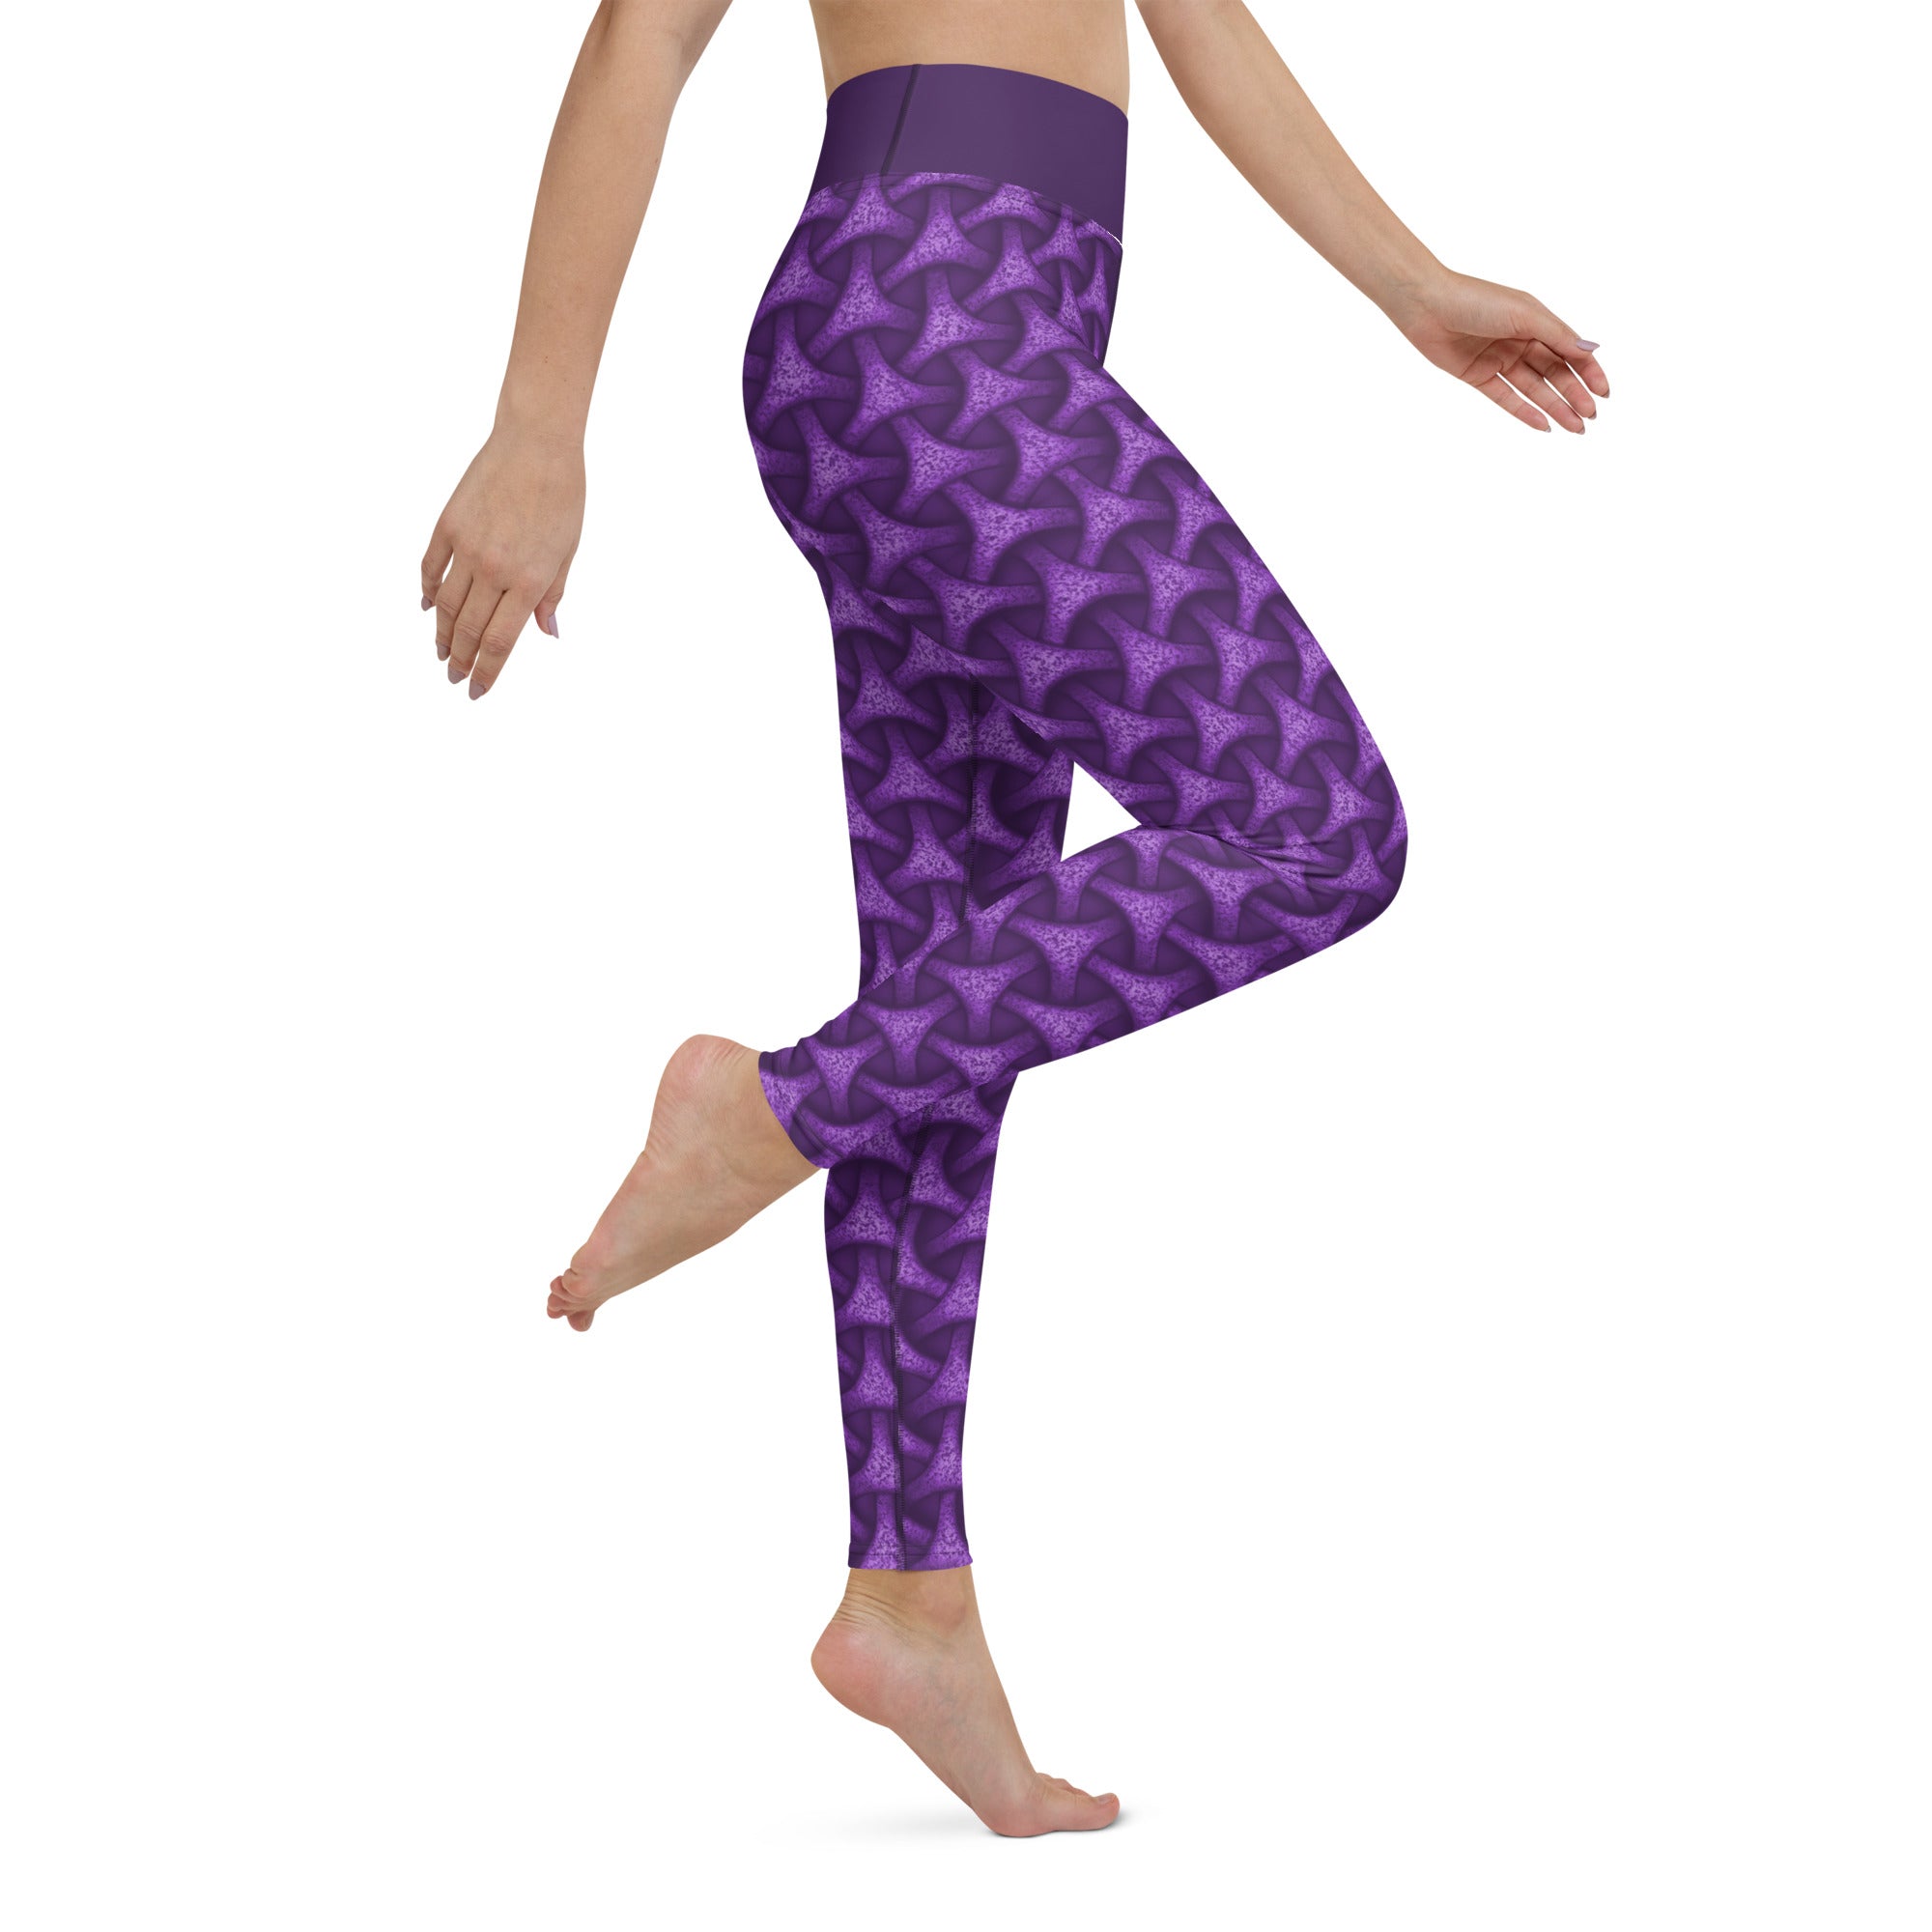 Pairing the Aurora Borealis Tristar Leggings with workout gear for an energizing session.